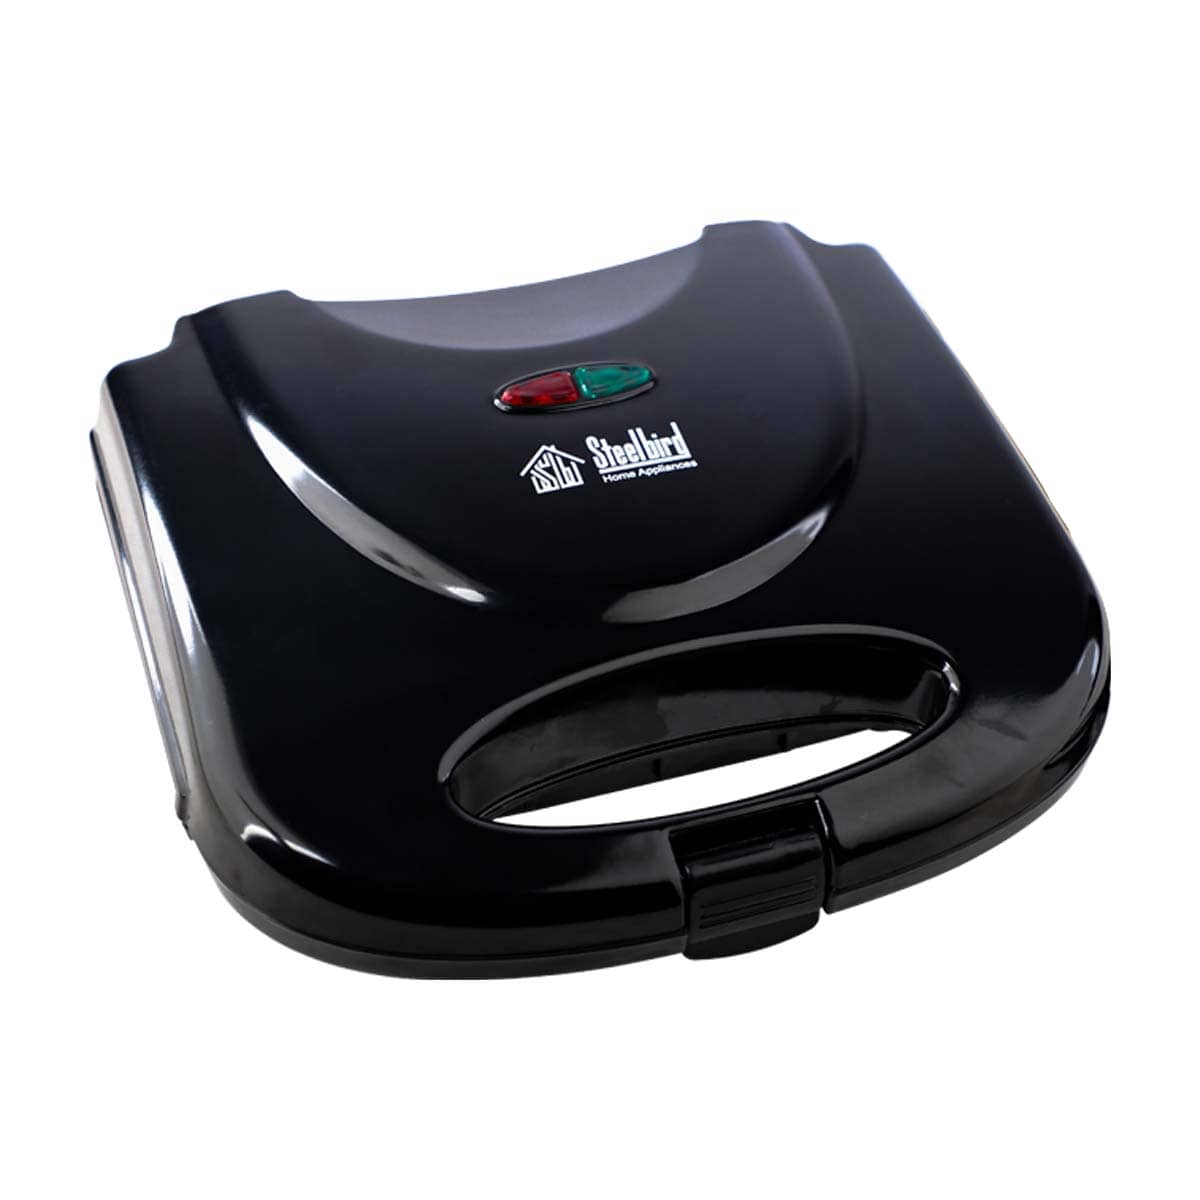 Steelbird Cyborg Toster Grill 750 Watt Grill Sandwich Maker With Non-Stick Coated Plates For Easy-to-Clean And Buckle Clips Lock (Black)